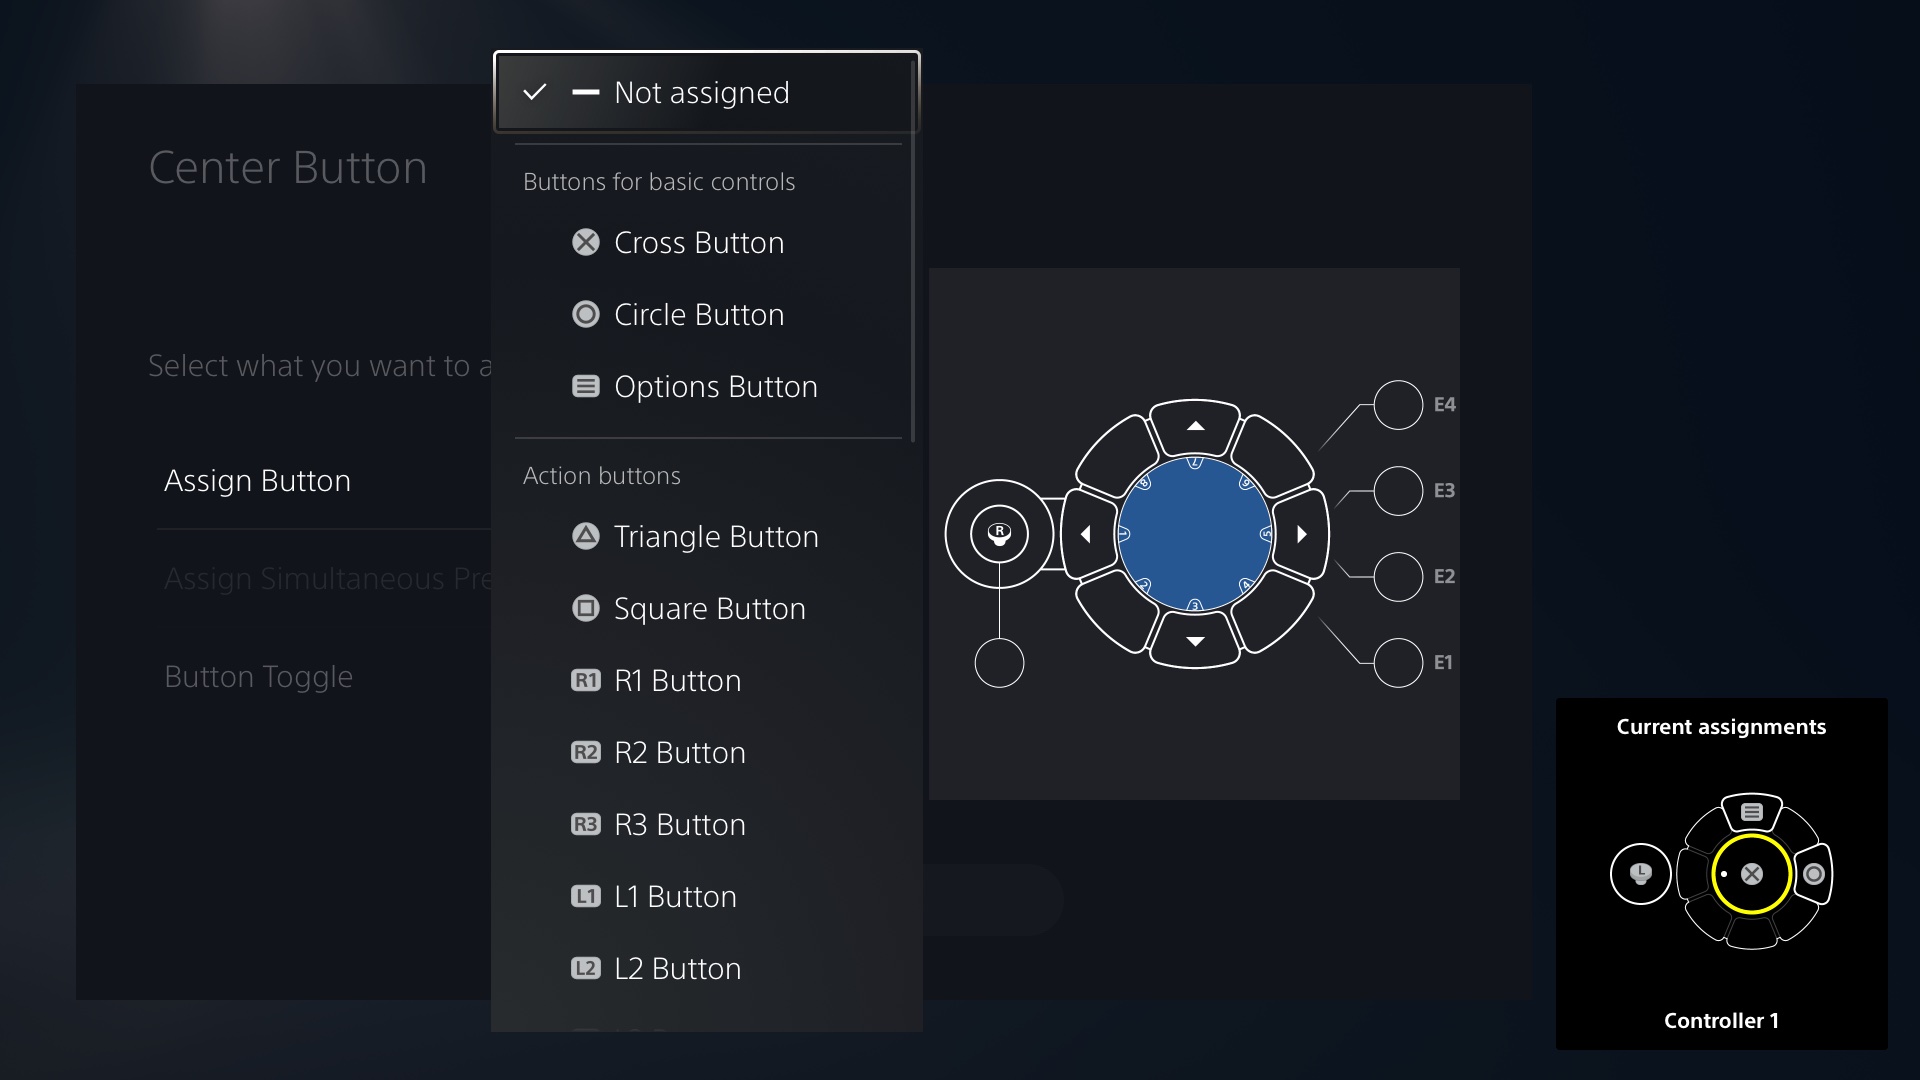  "Access controller UI image showing button assignment choices"